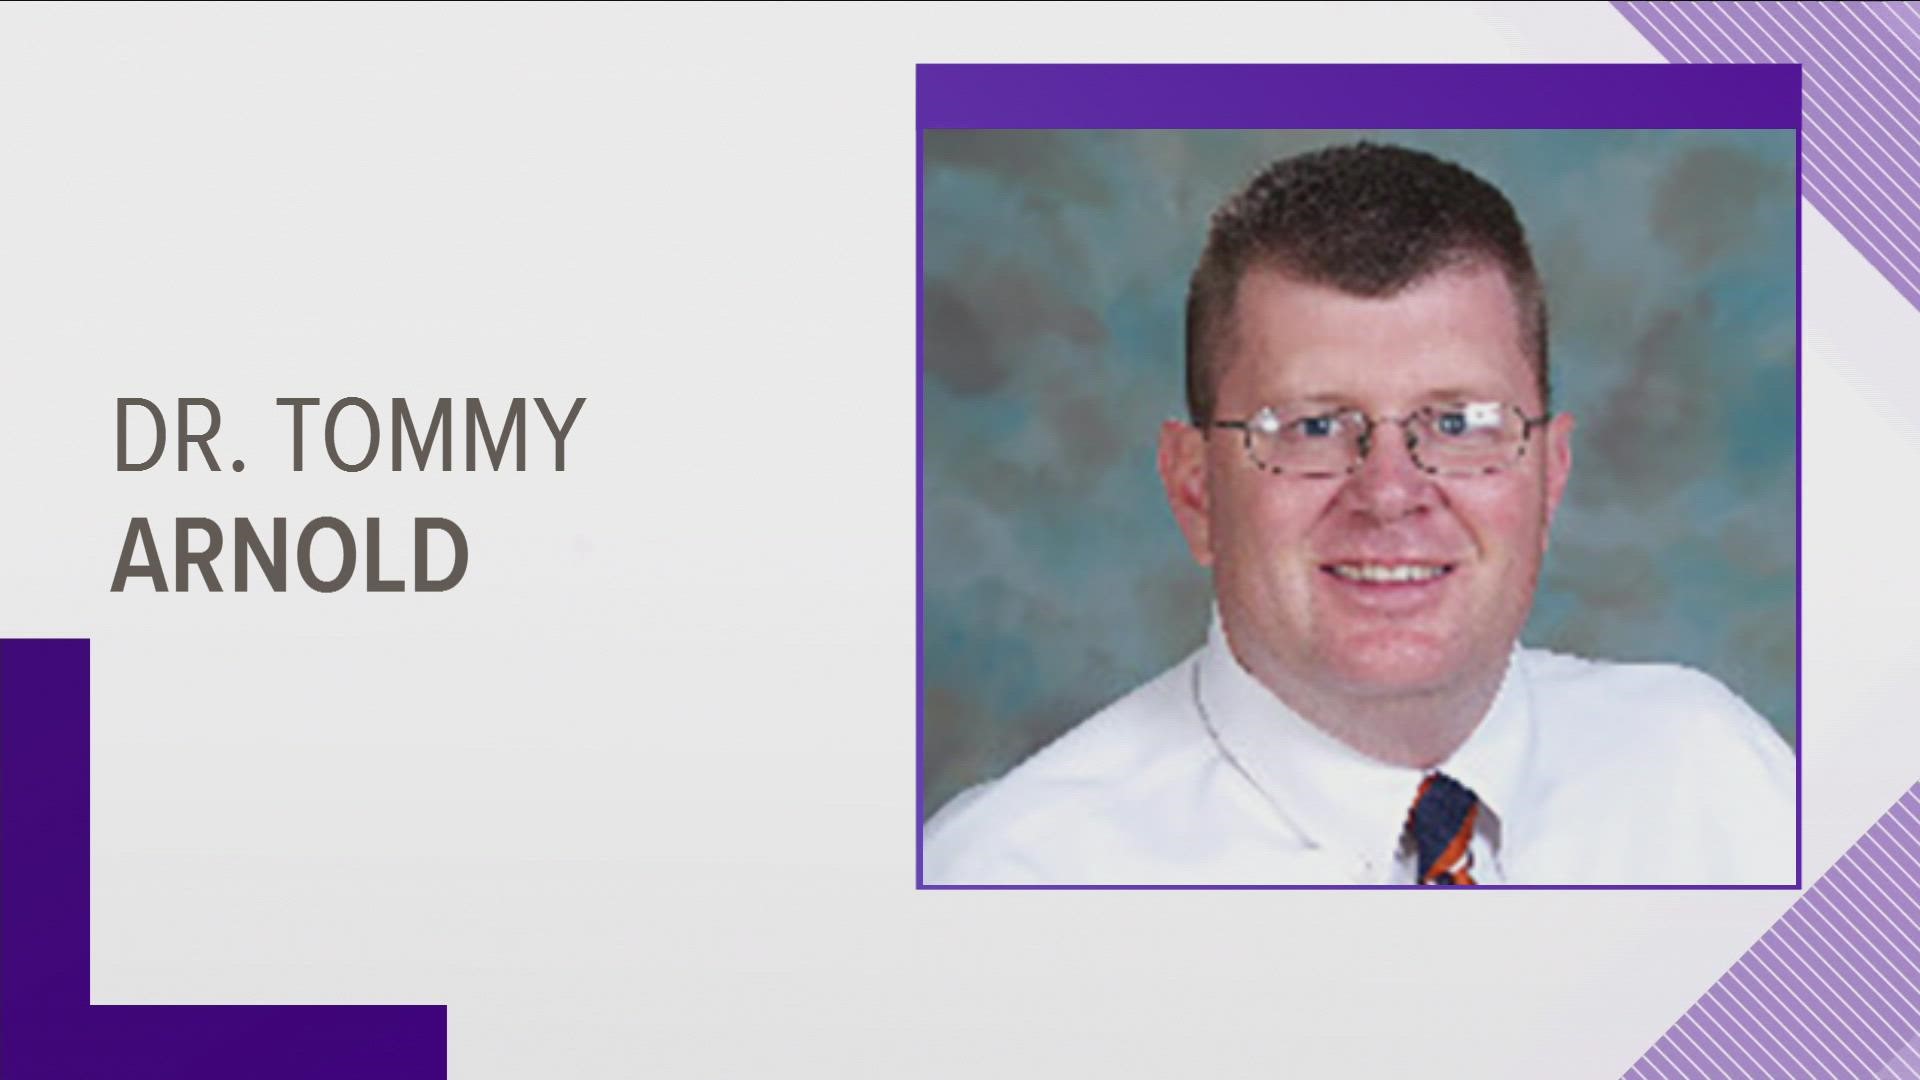 Dr. Tommy Arnold is a native of Jefferson County and has served as an assistant superintendent among other roles.